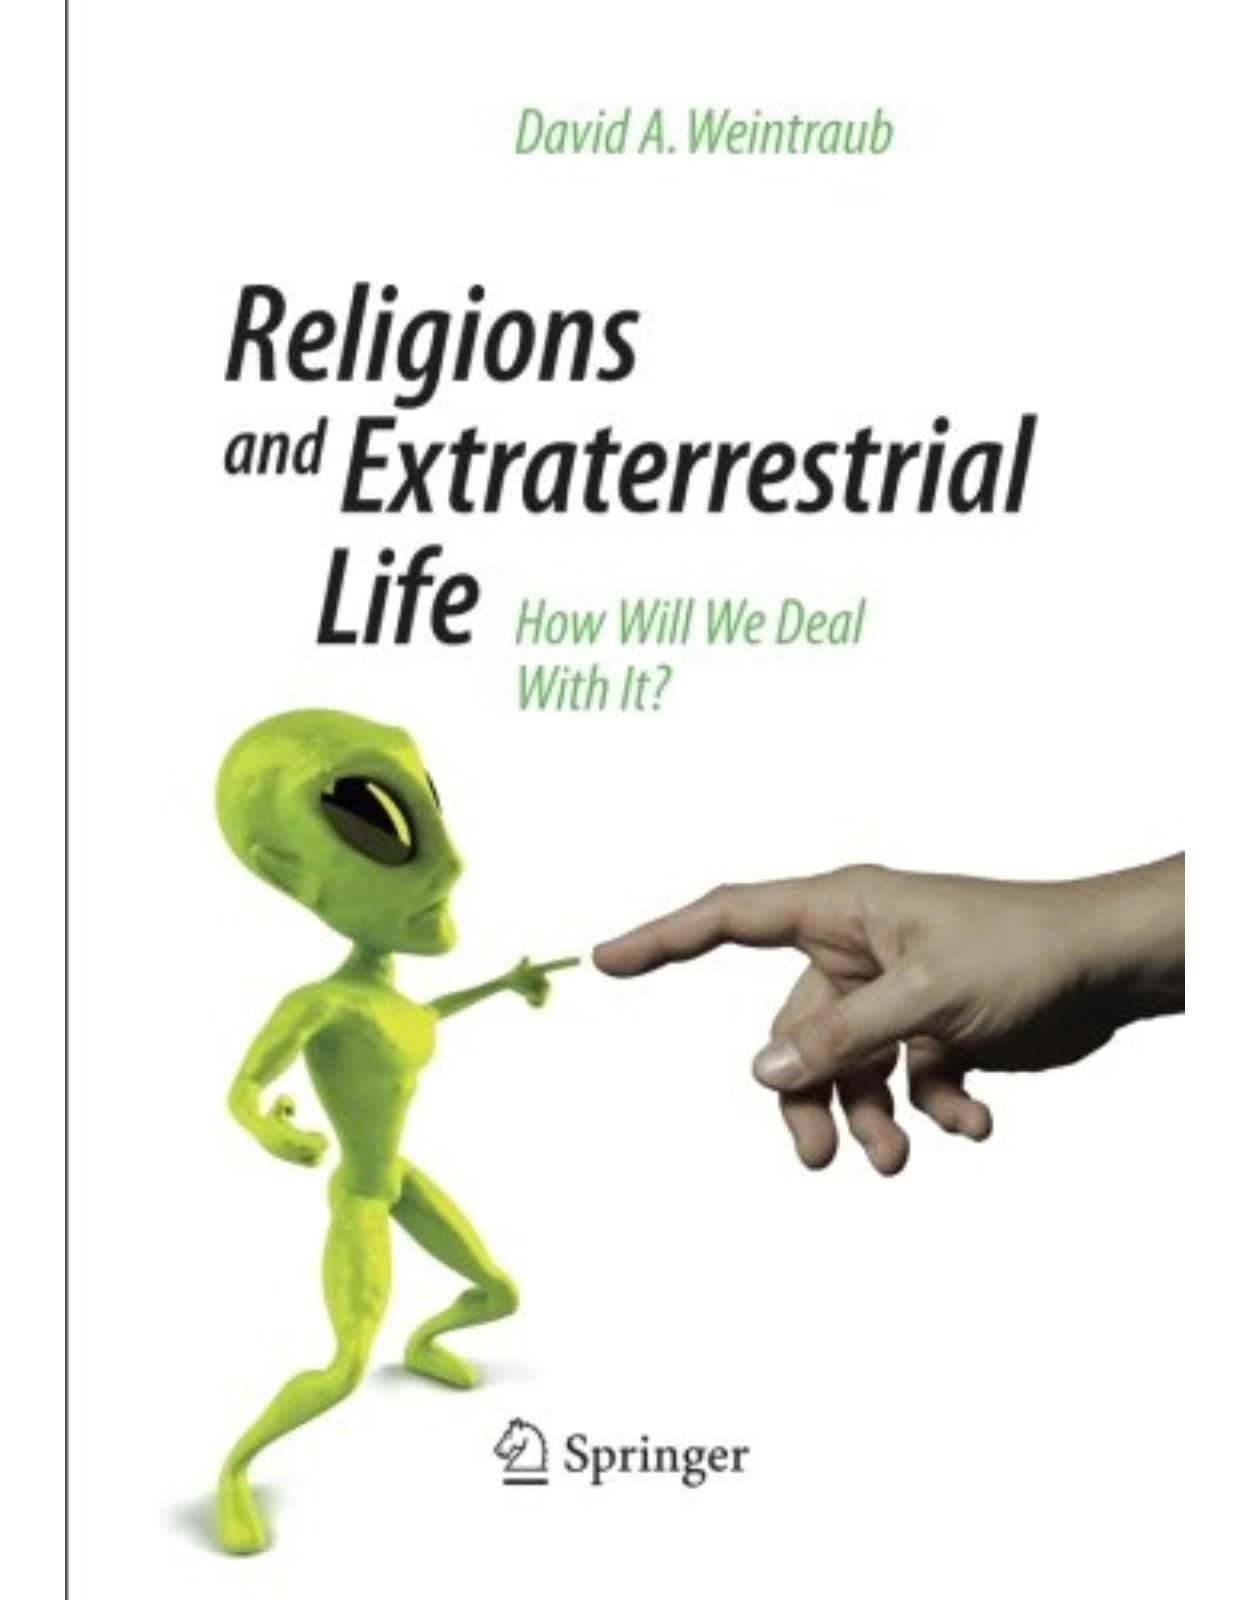 Religions and Extraterrestrial Life: How Will We Deal with It?